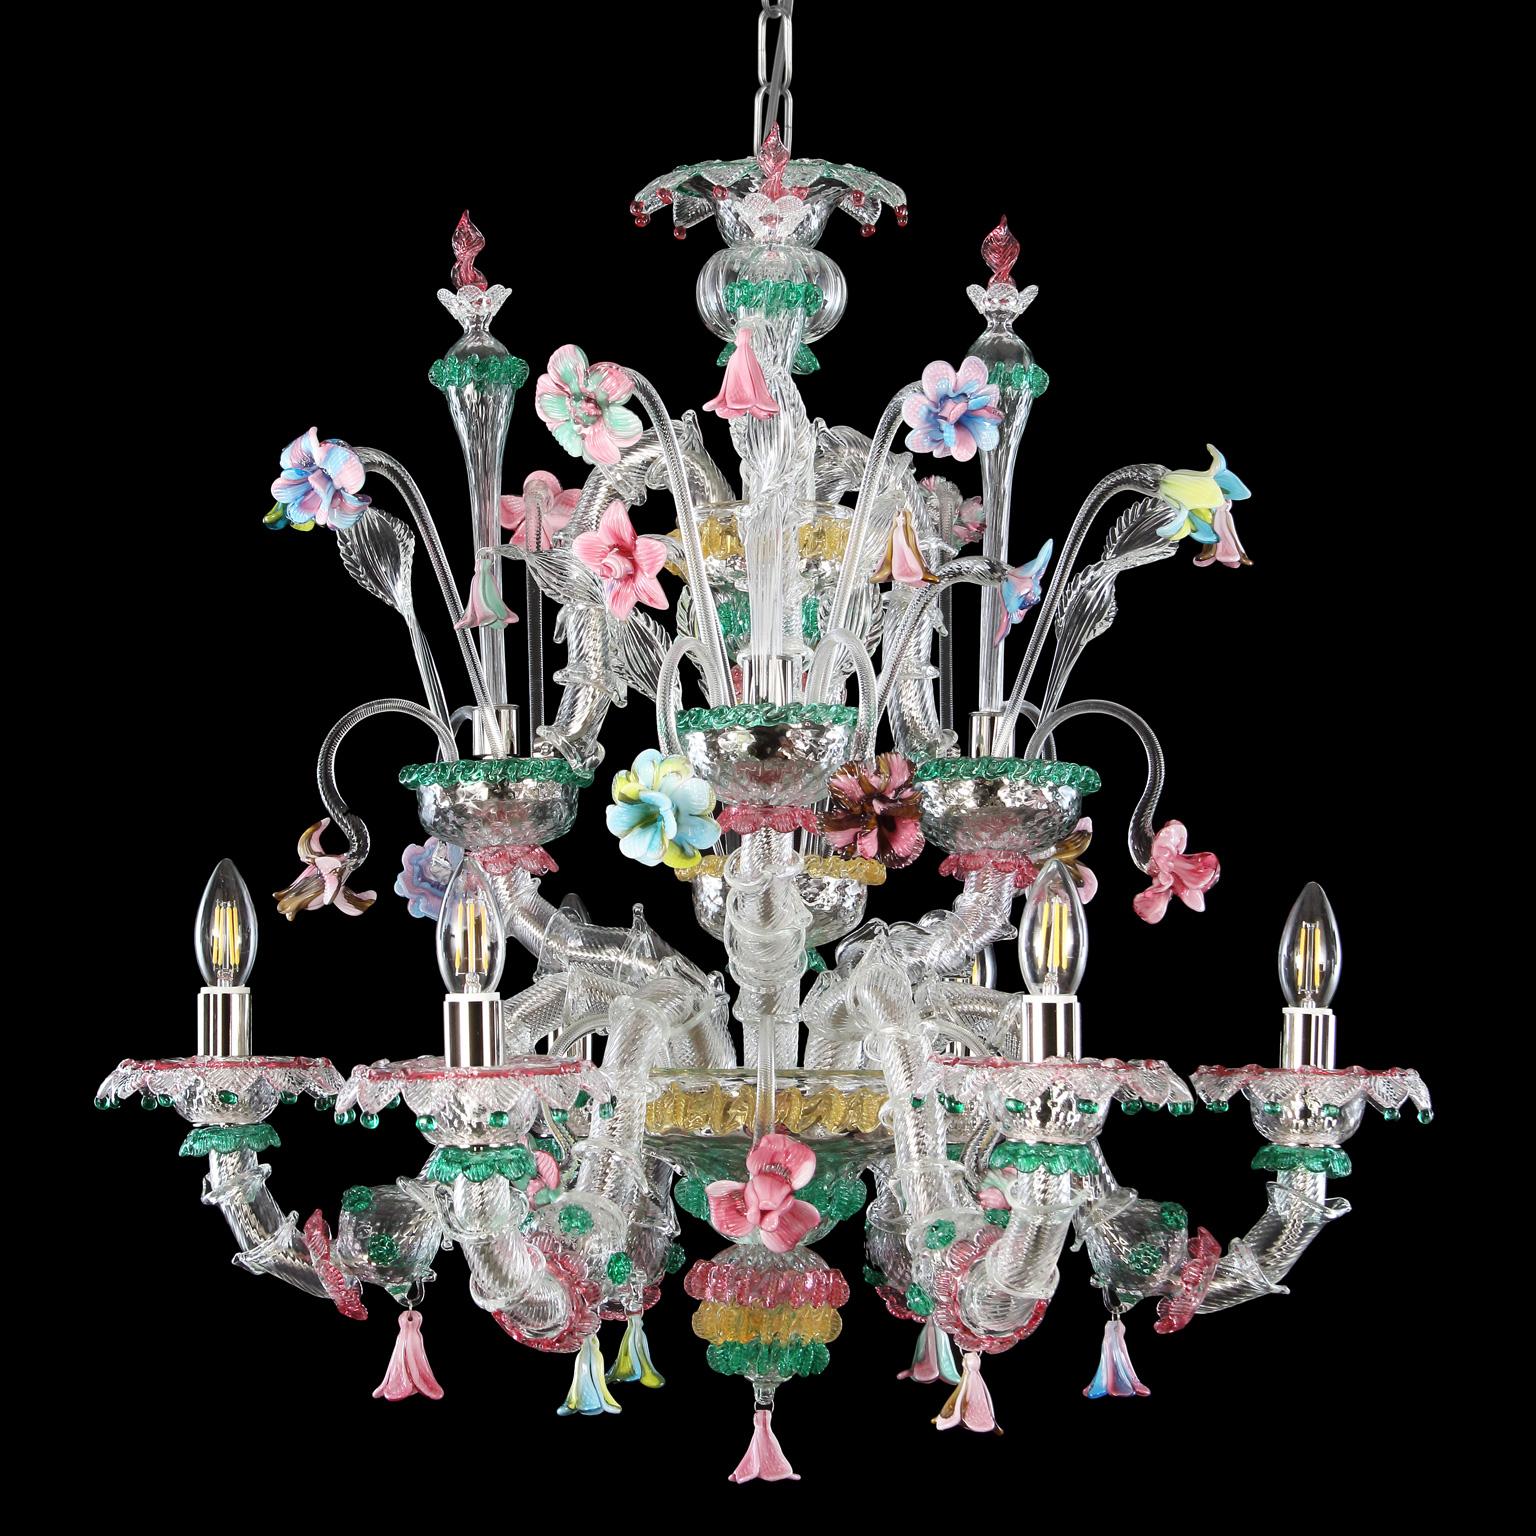 Rezzonico chandelier 6 arms, crystal Murano glass, rich of multi-color details with a predominance of the green color particulars by Multiforme.
This artistic glass chandelier is an elegant and delicate lighting work, colored with pastel tones. The